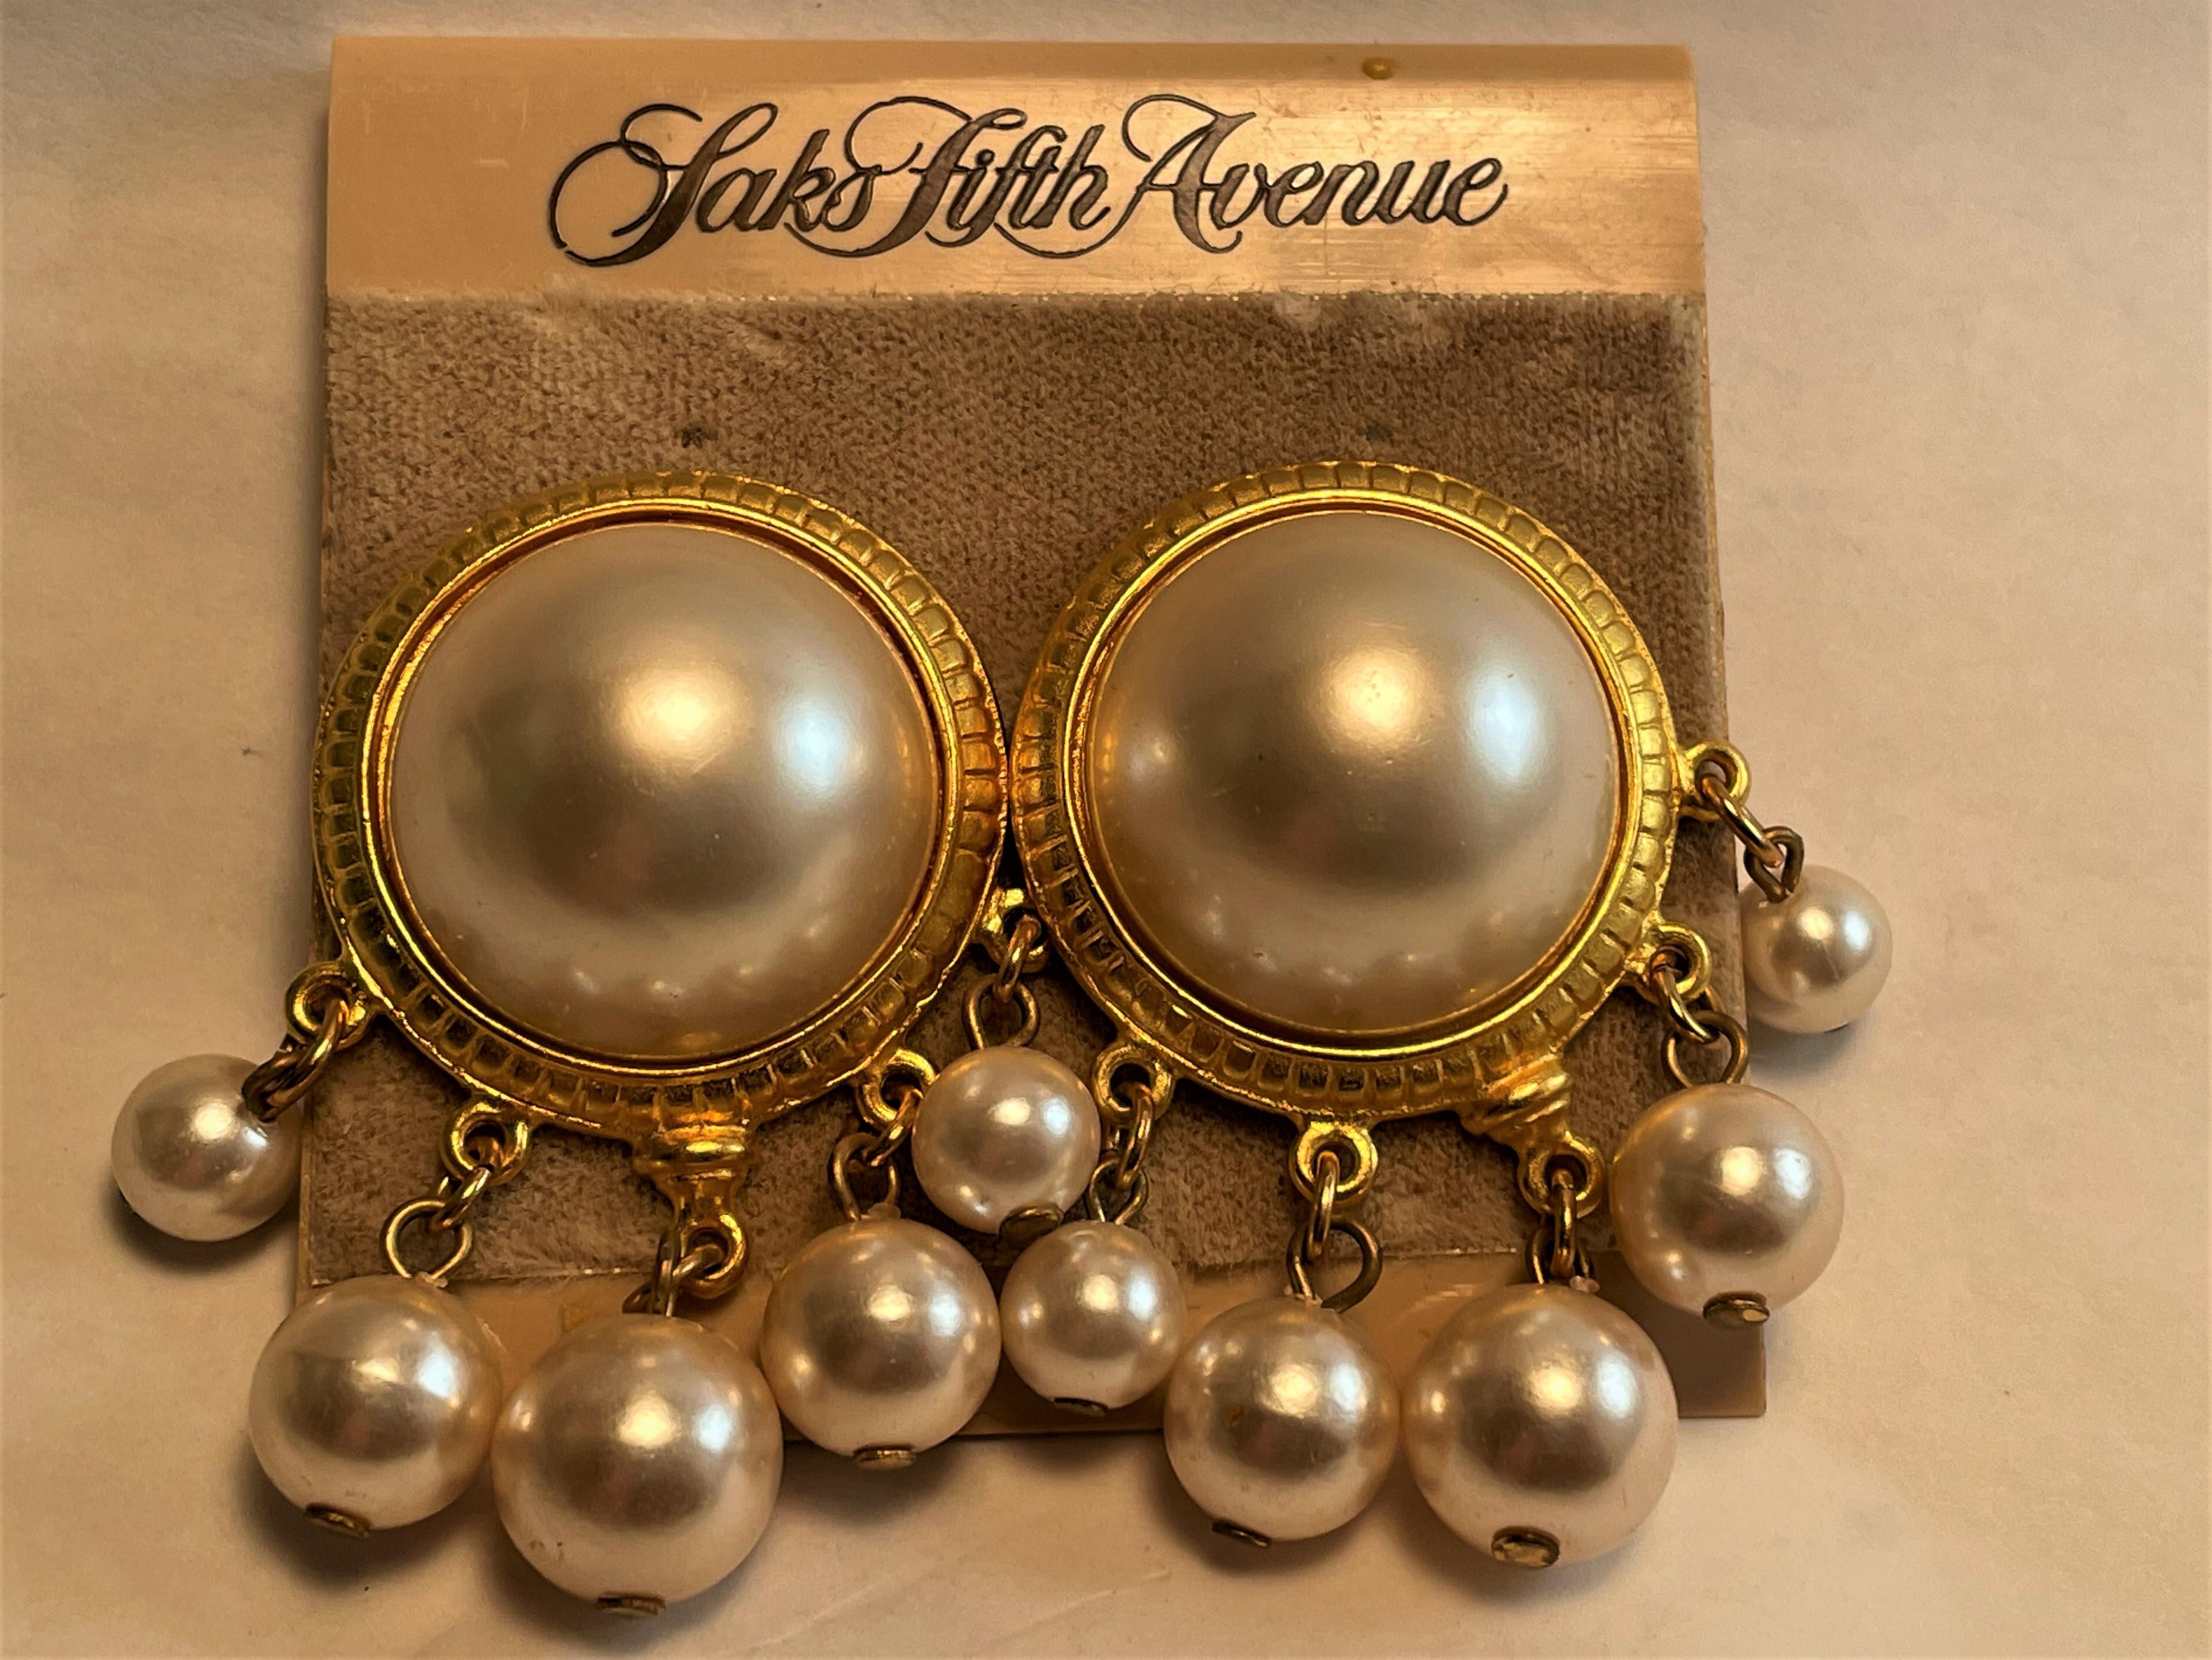 This is a fantastic pair of Ben-Amun clip on earrings with a large (about 7/8 inch diameter) vibrant faux mabe pearl surrounded by a rich, bright gold patterned frame with five lustrous bulbous pearl drops which graduate in size from each side to